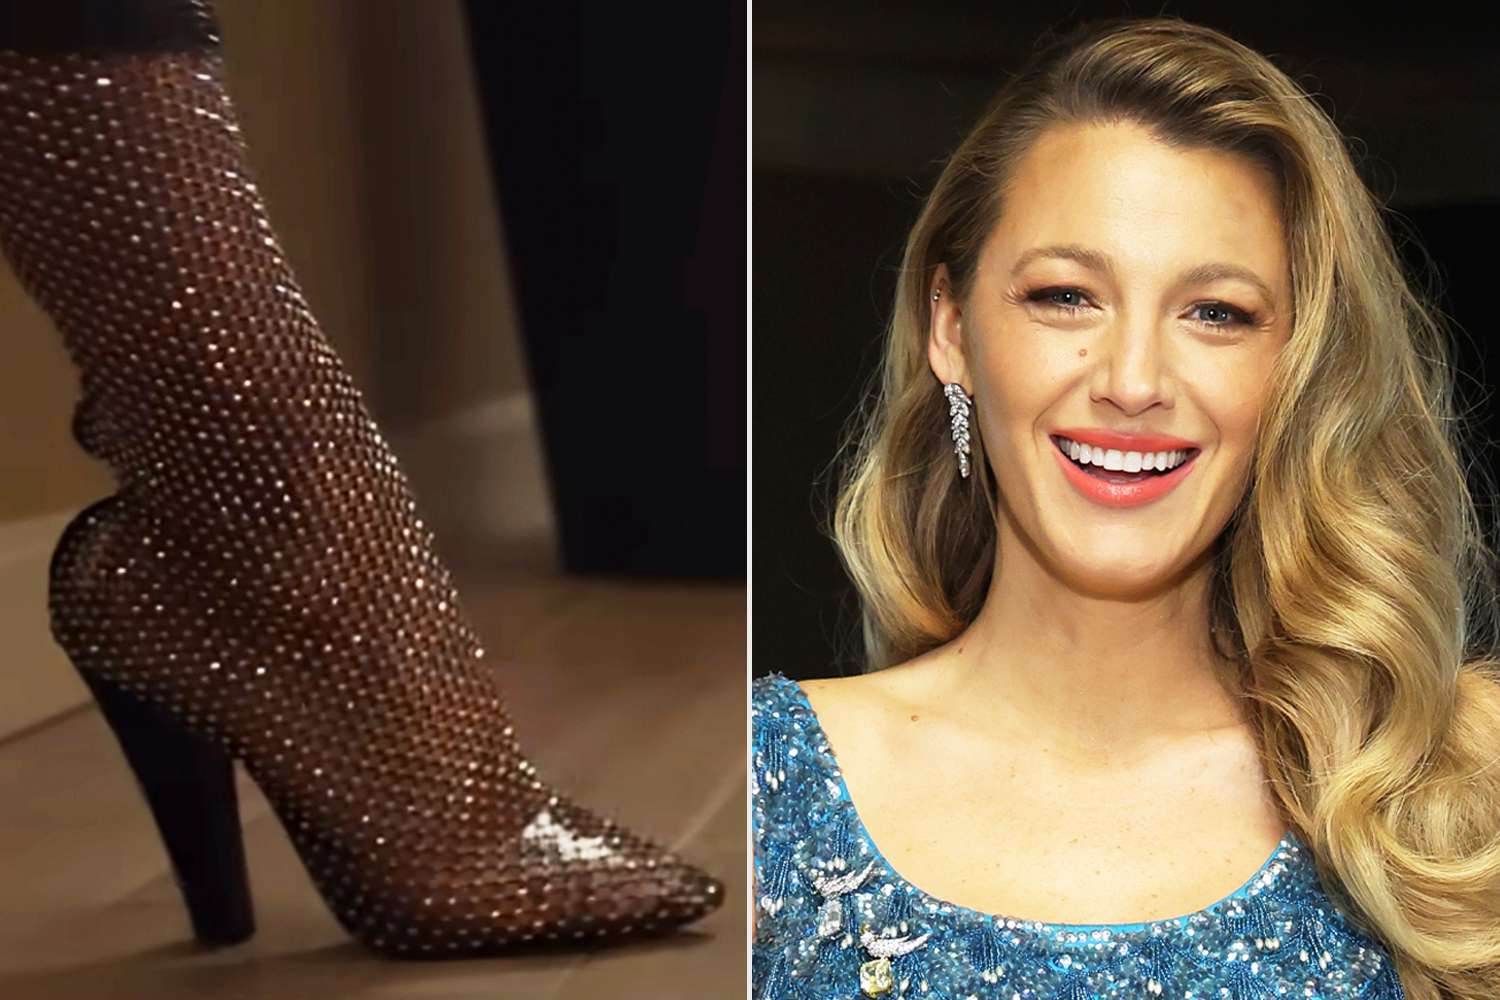 Blake Lively Reveals She 'Loaned' Her 'Real-Life' Sparkly Boots to Her 'It Ends with Us' Character